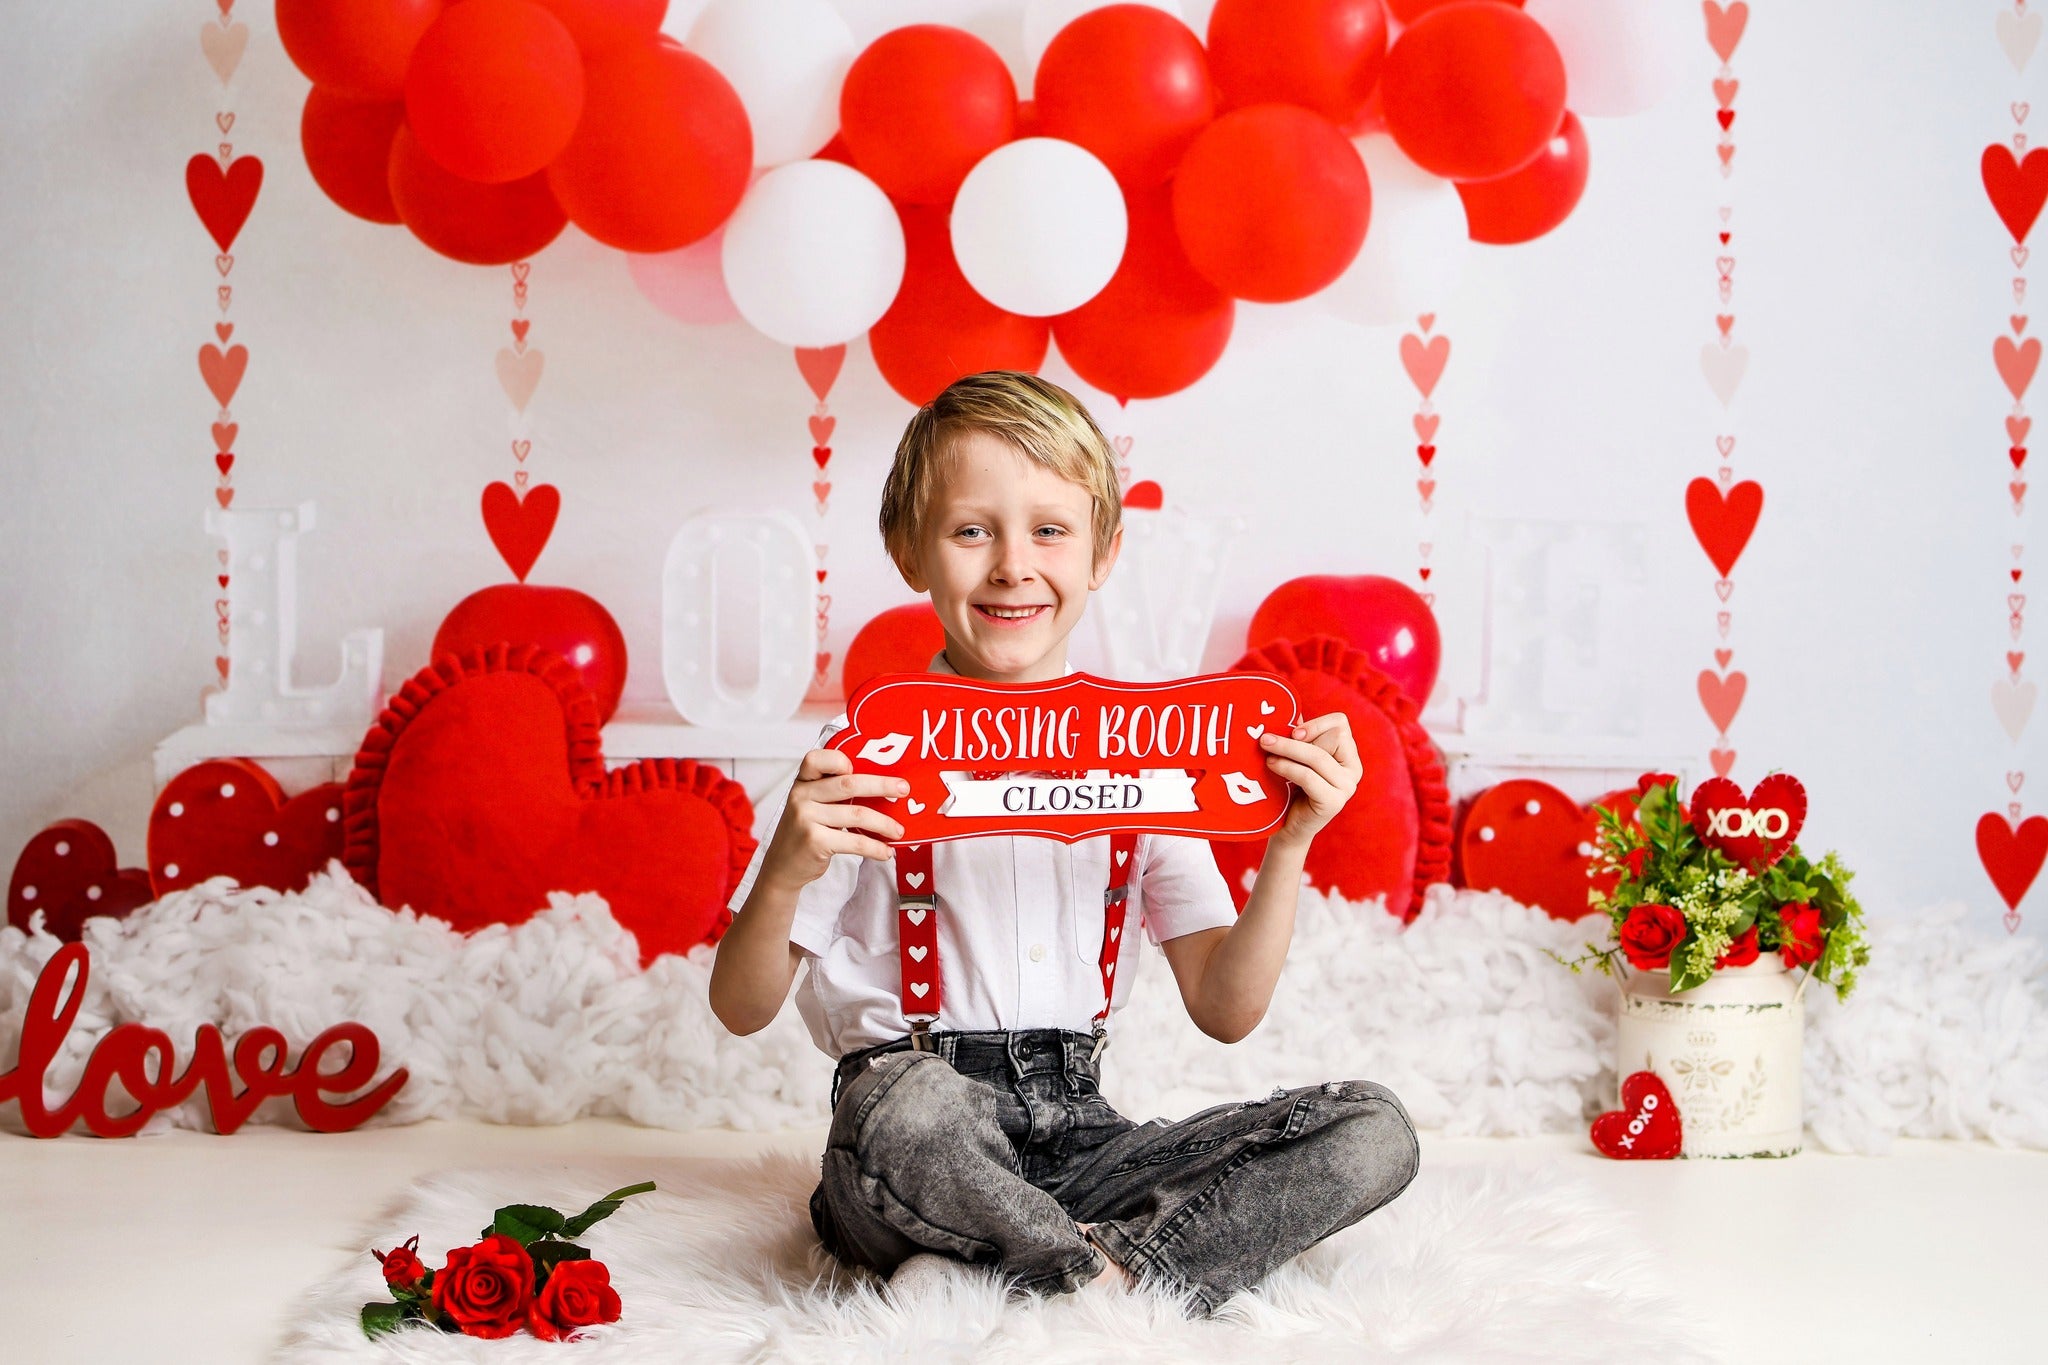 Kate Valentine's Day Balloons Love Heart Backdrop Designed by Uta Mueller Photography